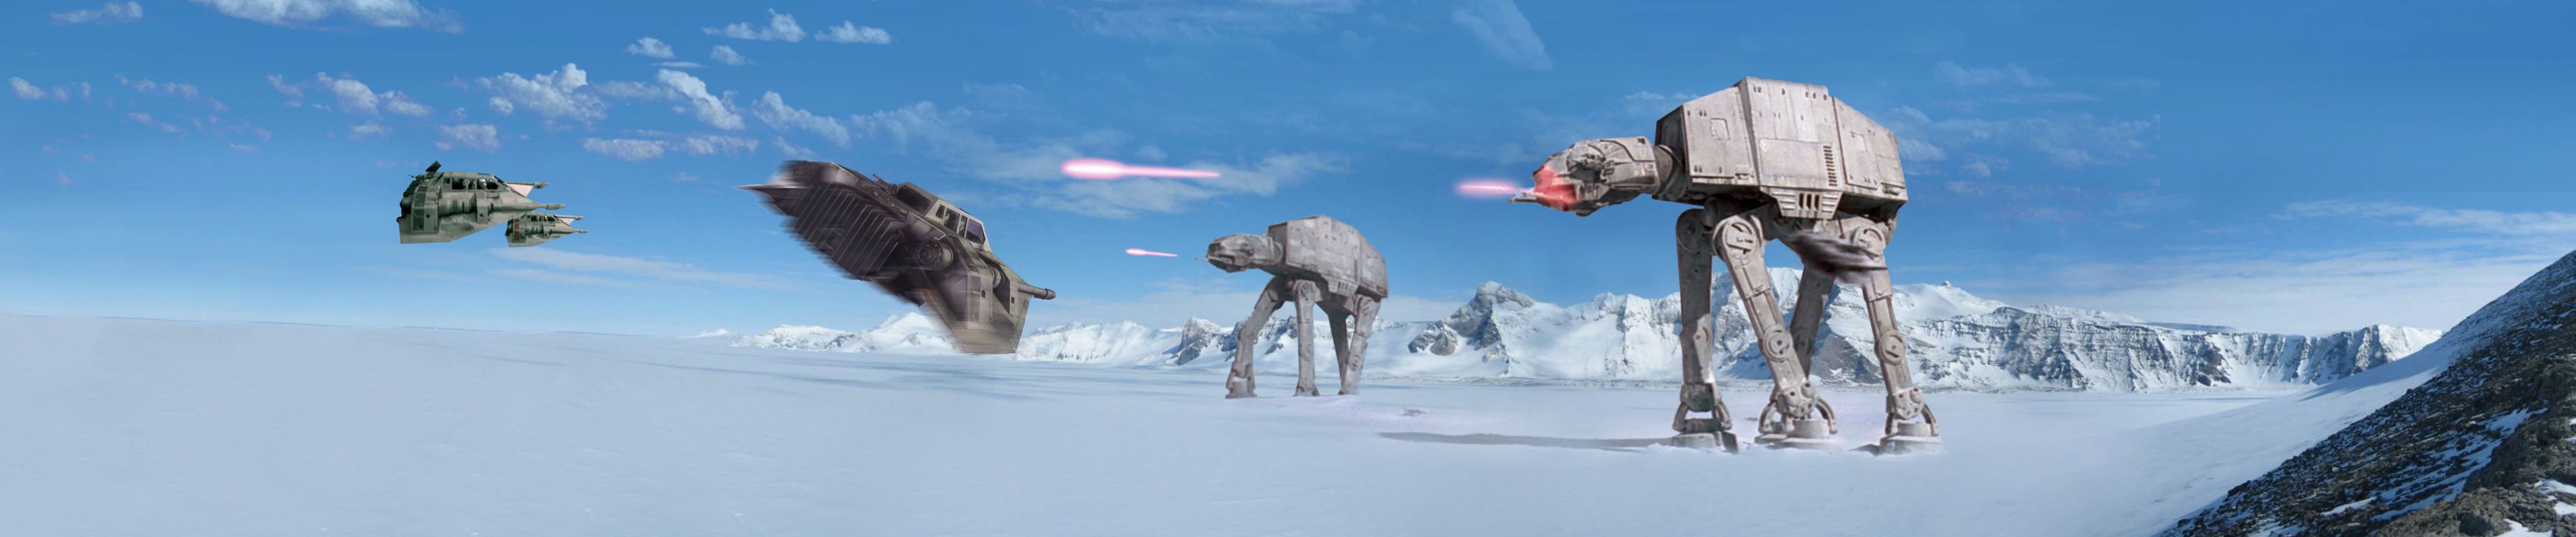 Star Wars Episode V: The Empire Strikes AT-ATs On Hoth Ultra HD ...